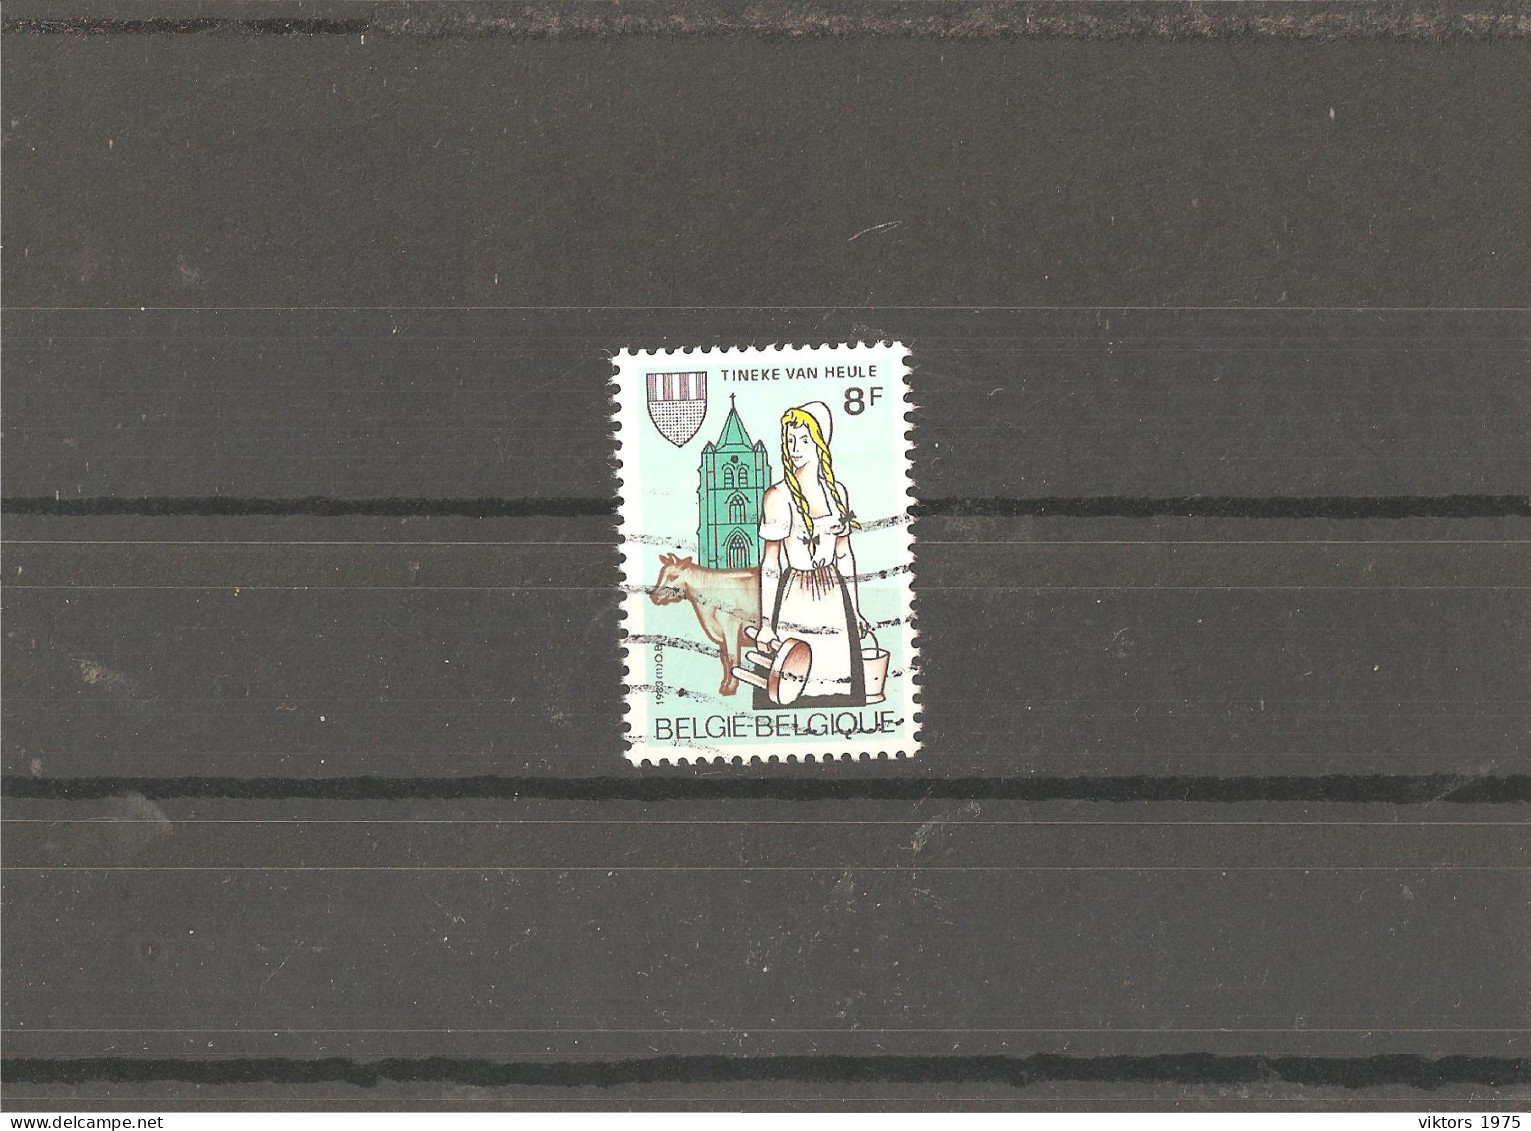 Used Stamp Nr.2152 In MICHEL Catalog - Used Stamps